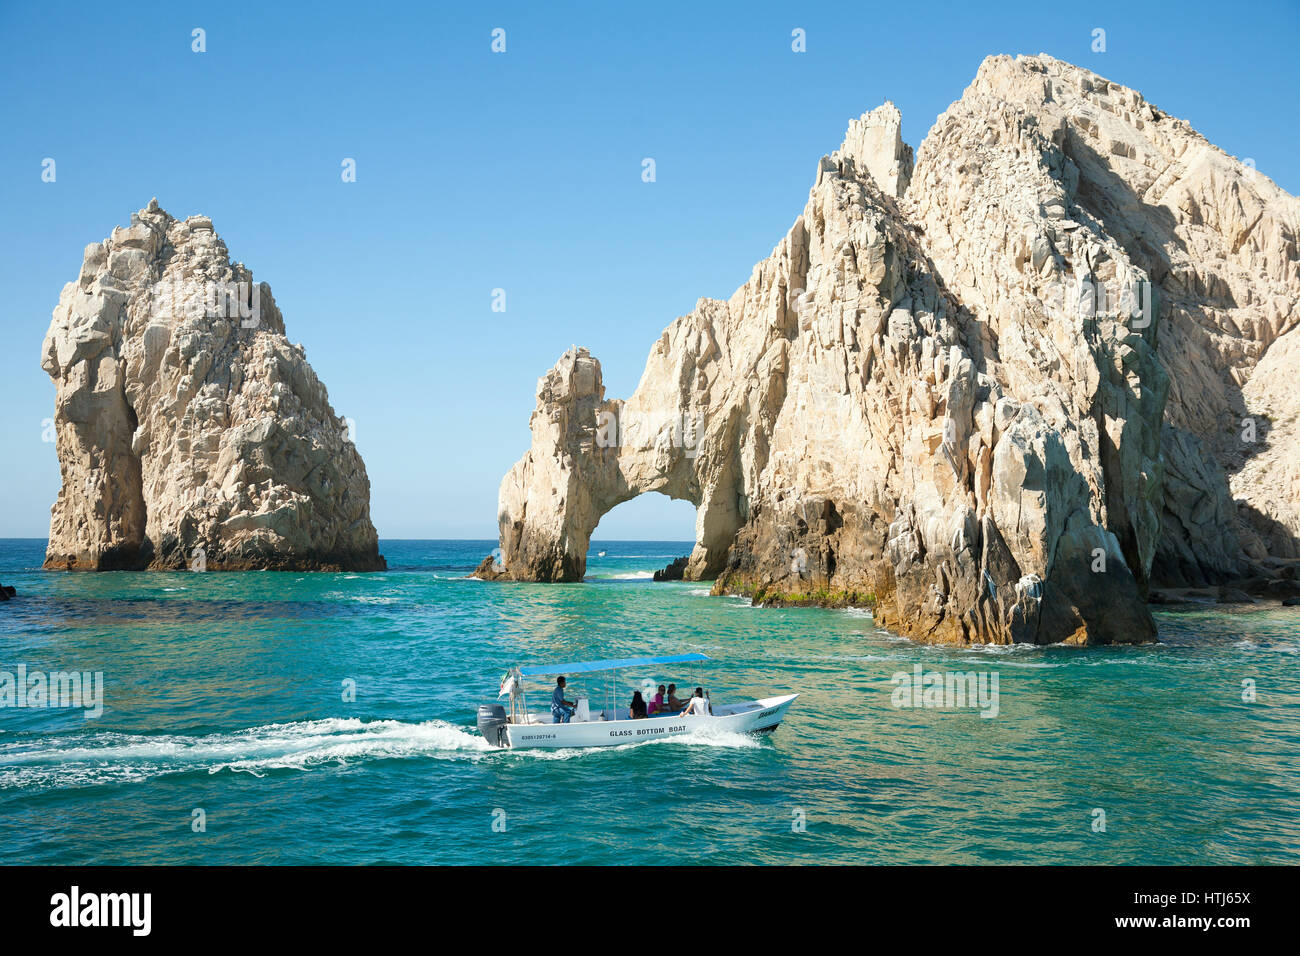 CABO SAN LUCAS, MEXICO -MARCH 20, 2012 :  Boat with tourists approaching The Arch  Cabo San Lucas, Mexico Stock Photo